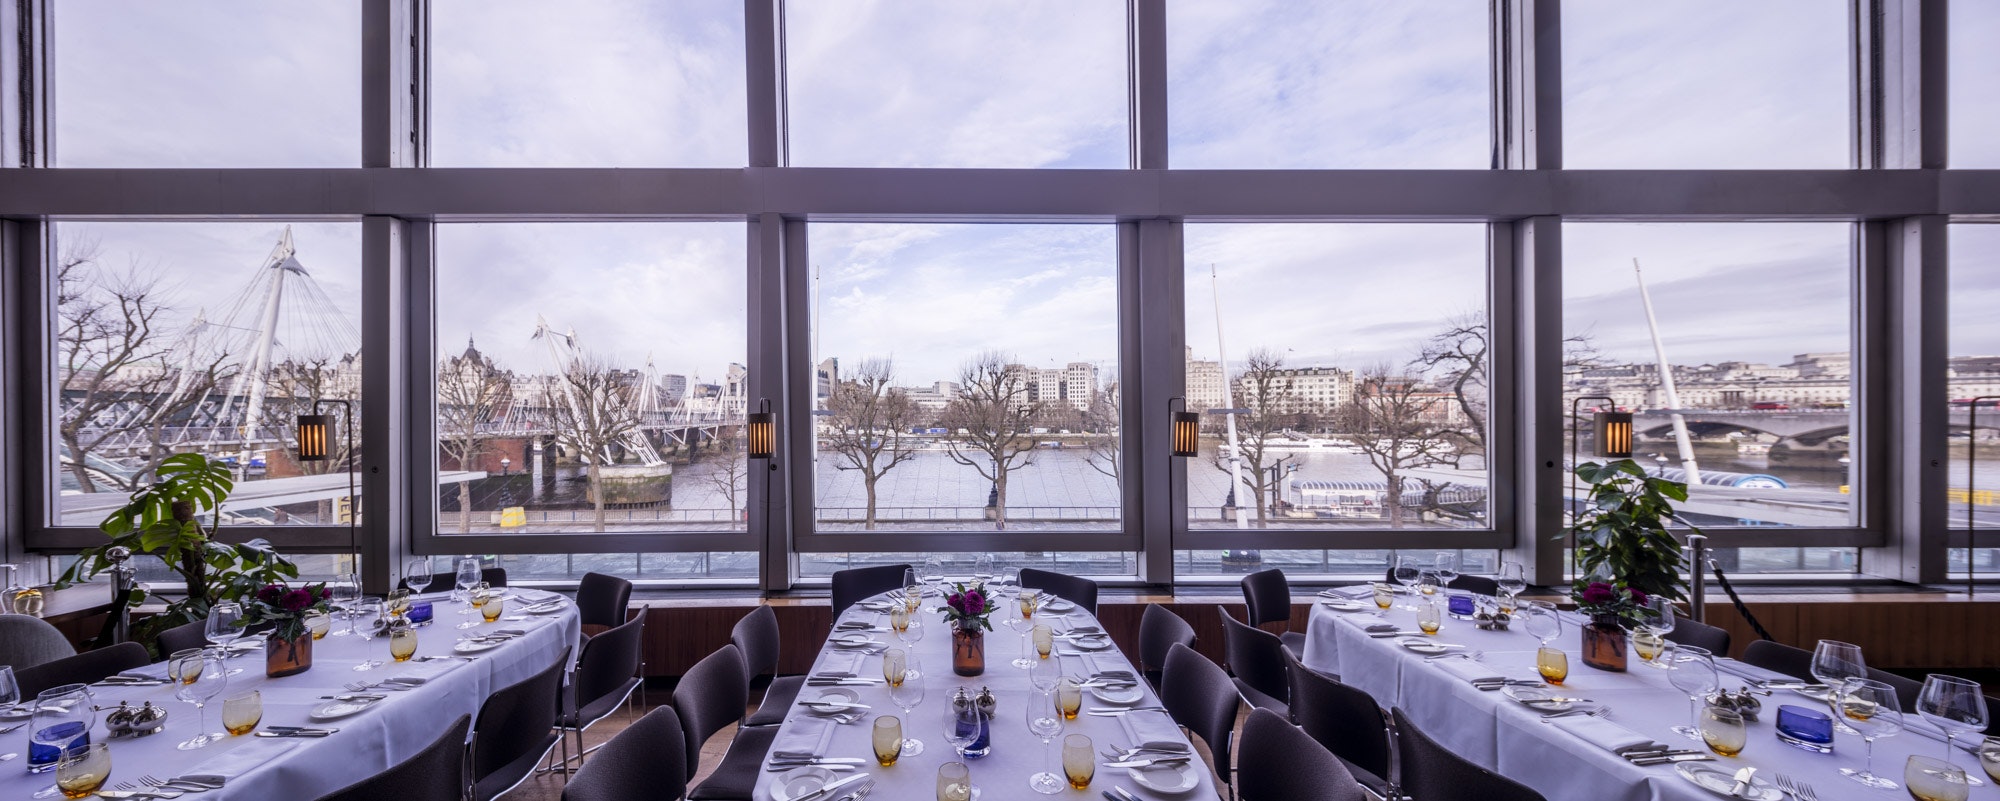 Restaurants With Private Rooms Venues in London - Skylon